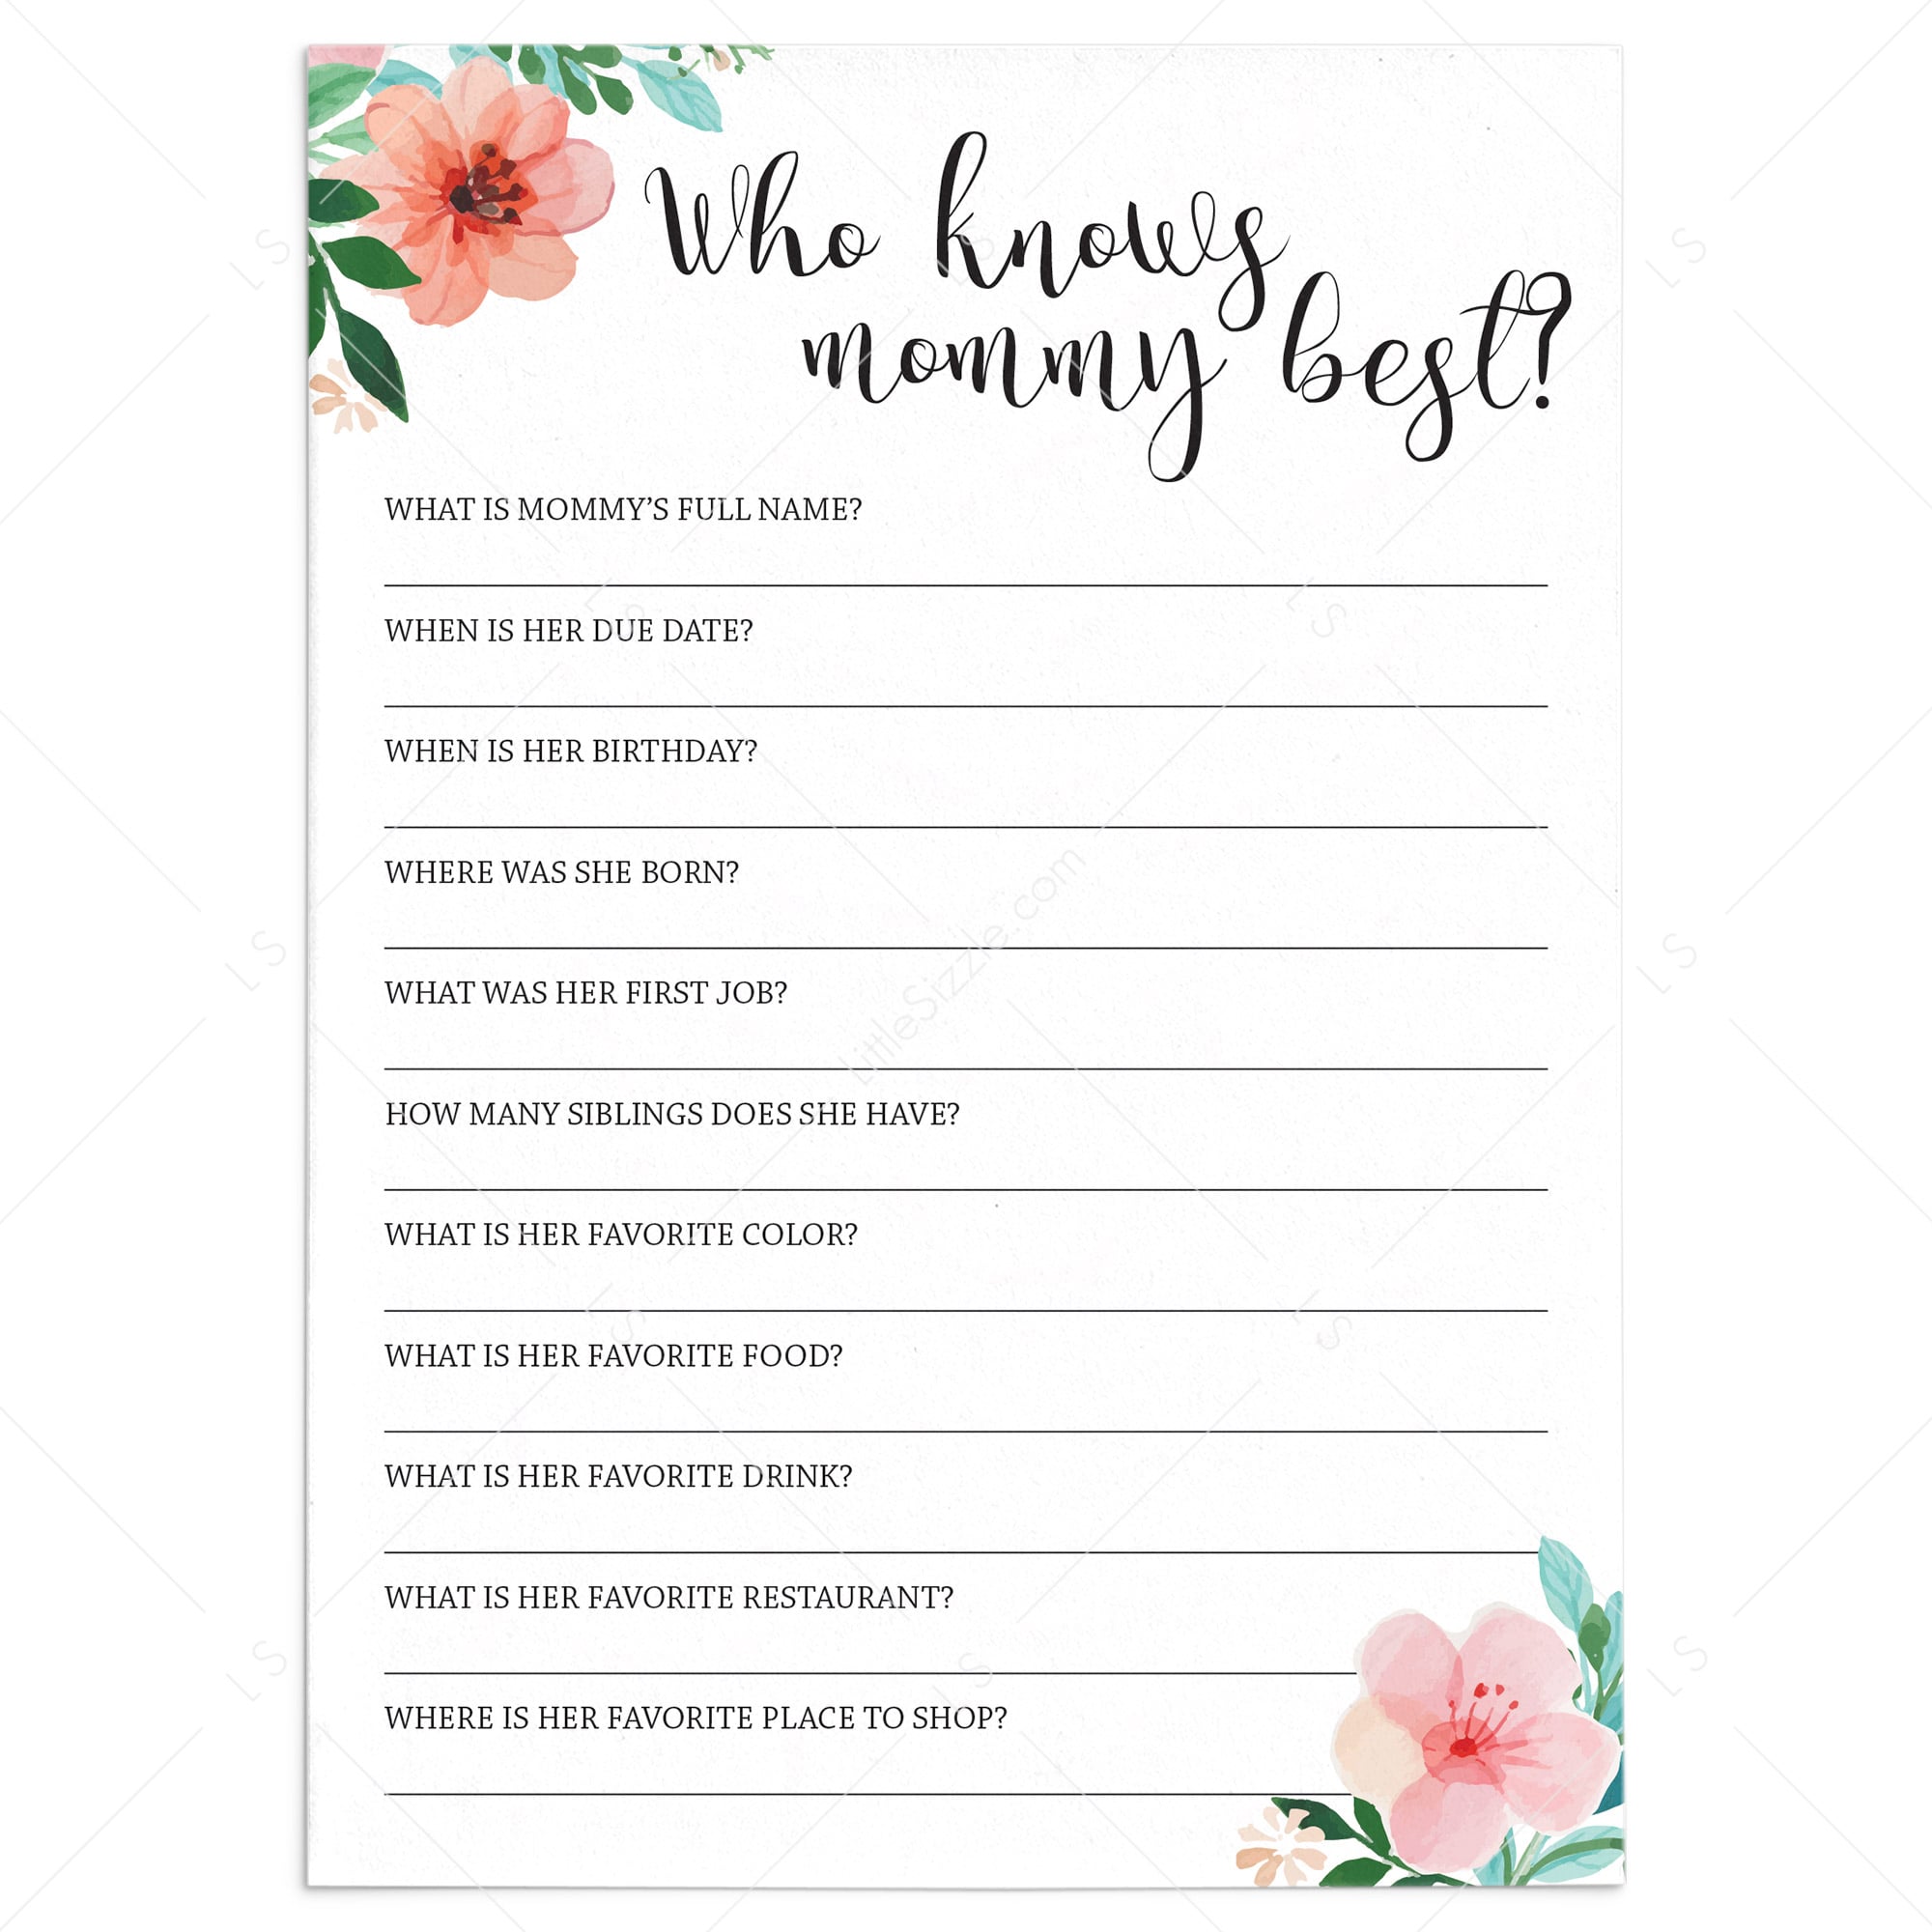 free-printable-baby-shower-games-who-knows-mommy-the-best